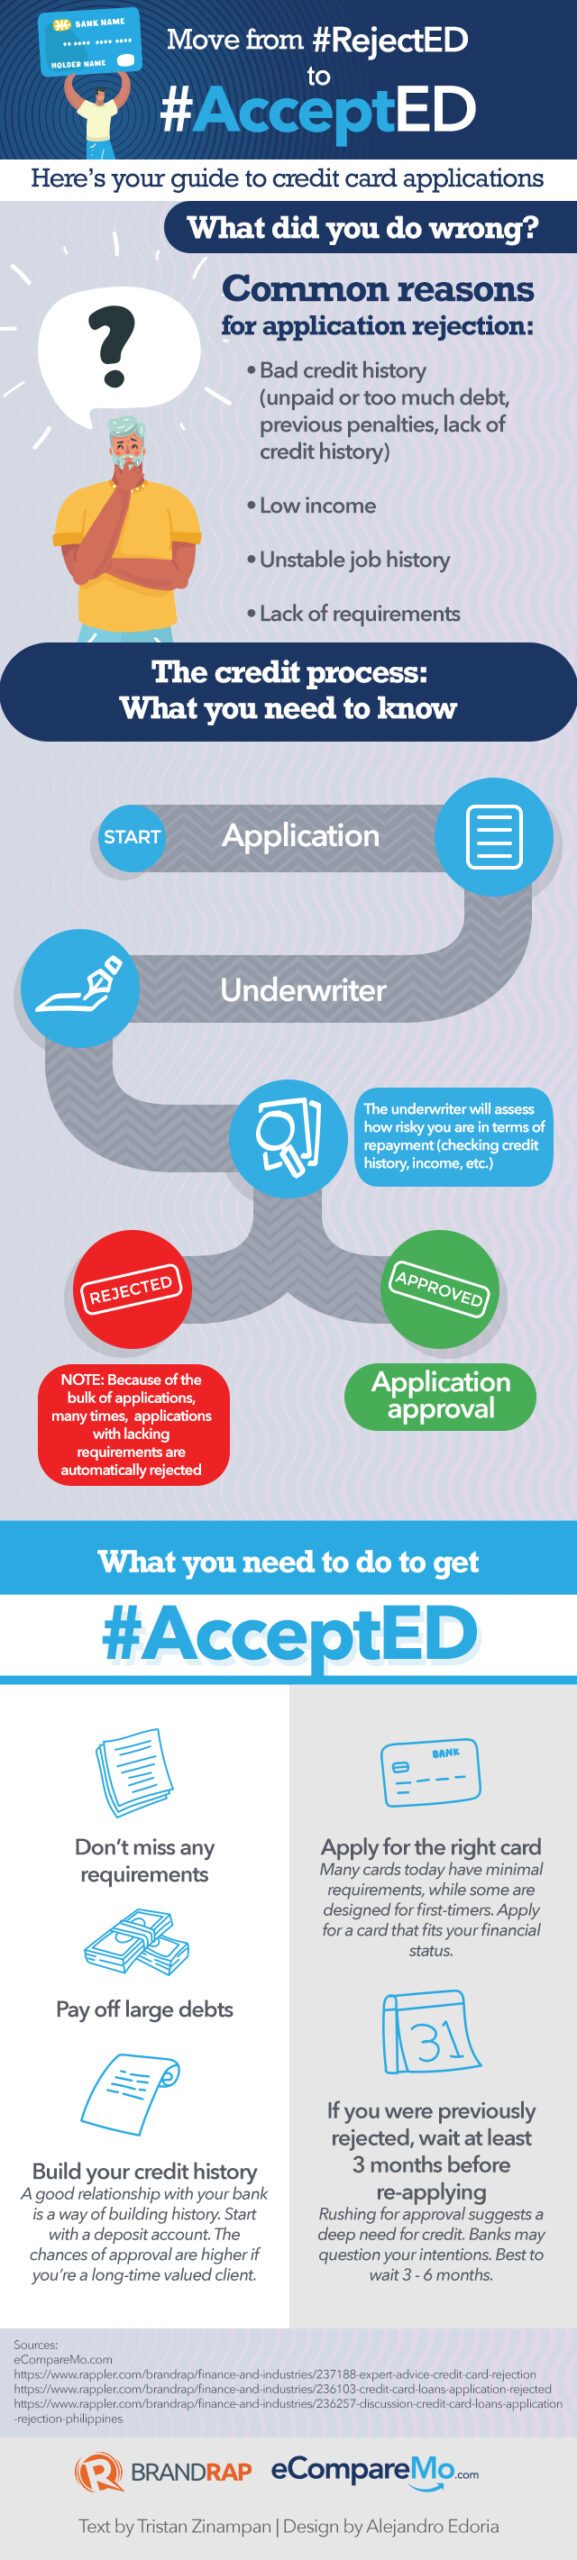 INFOGRAPHIC: How to avoid credit card rejection and get #AcceptED